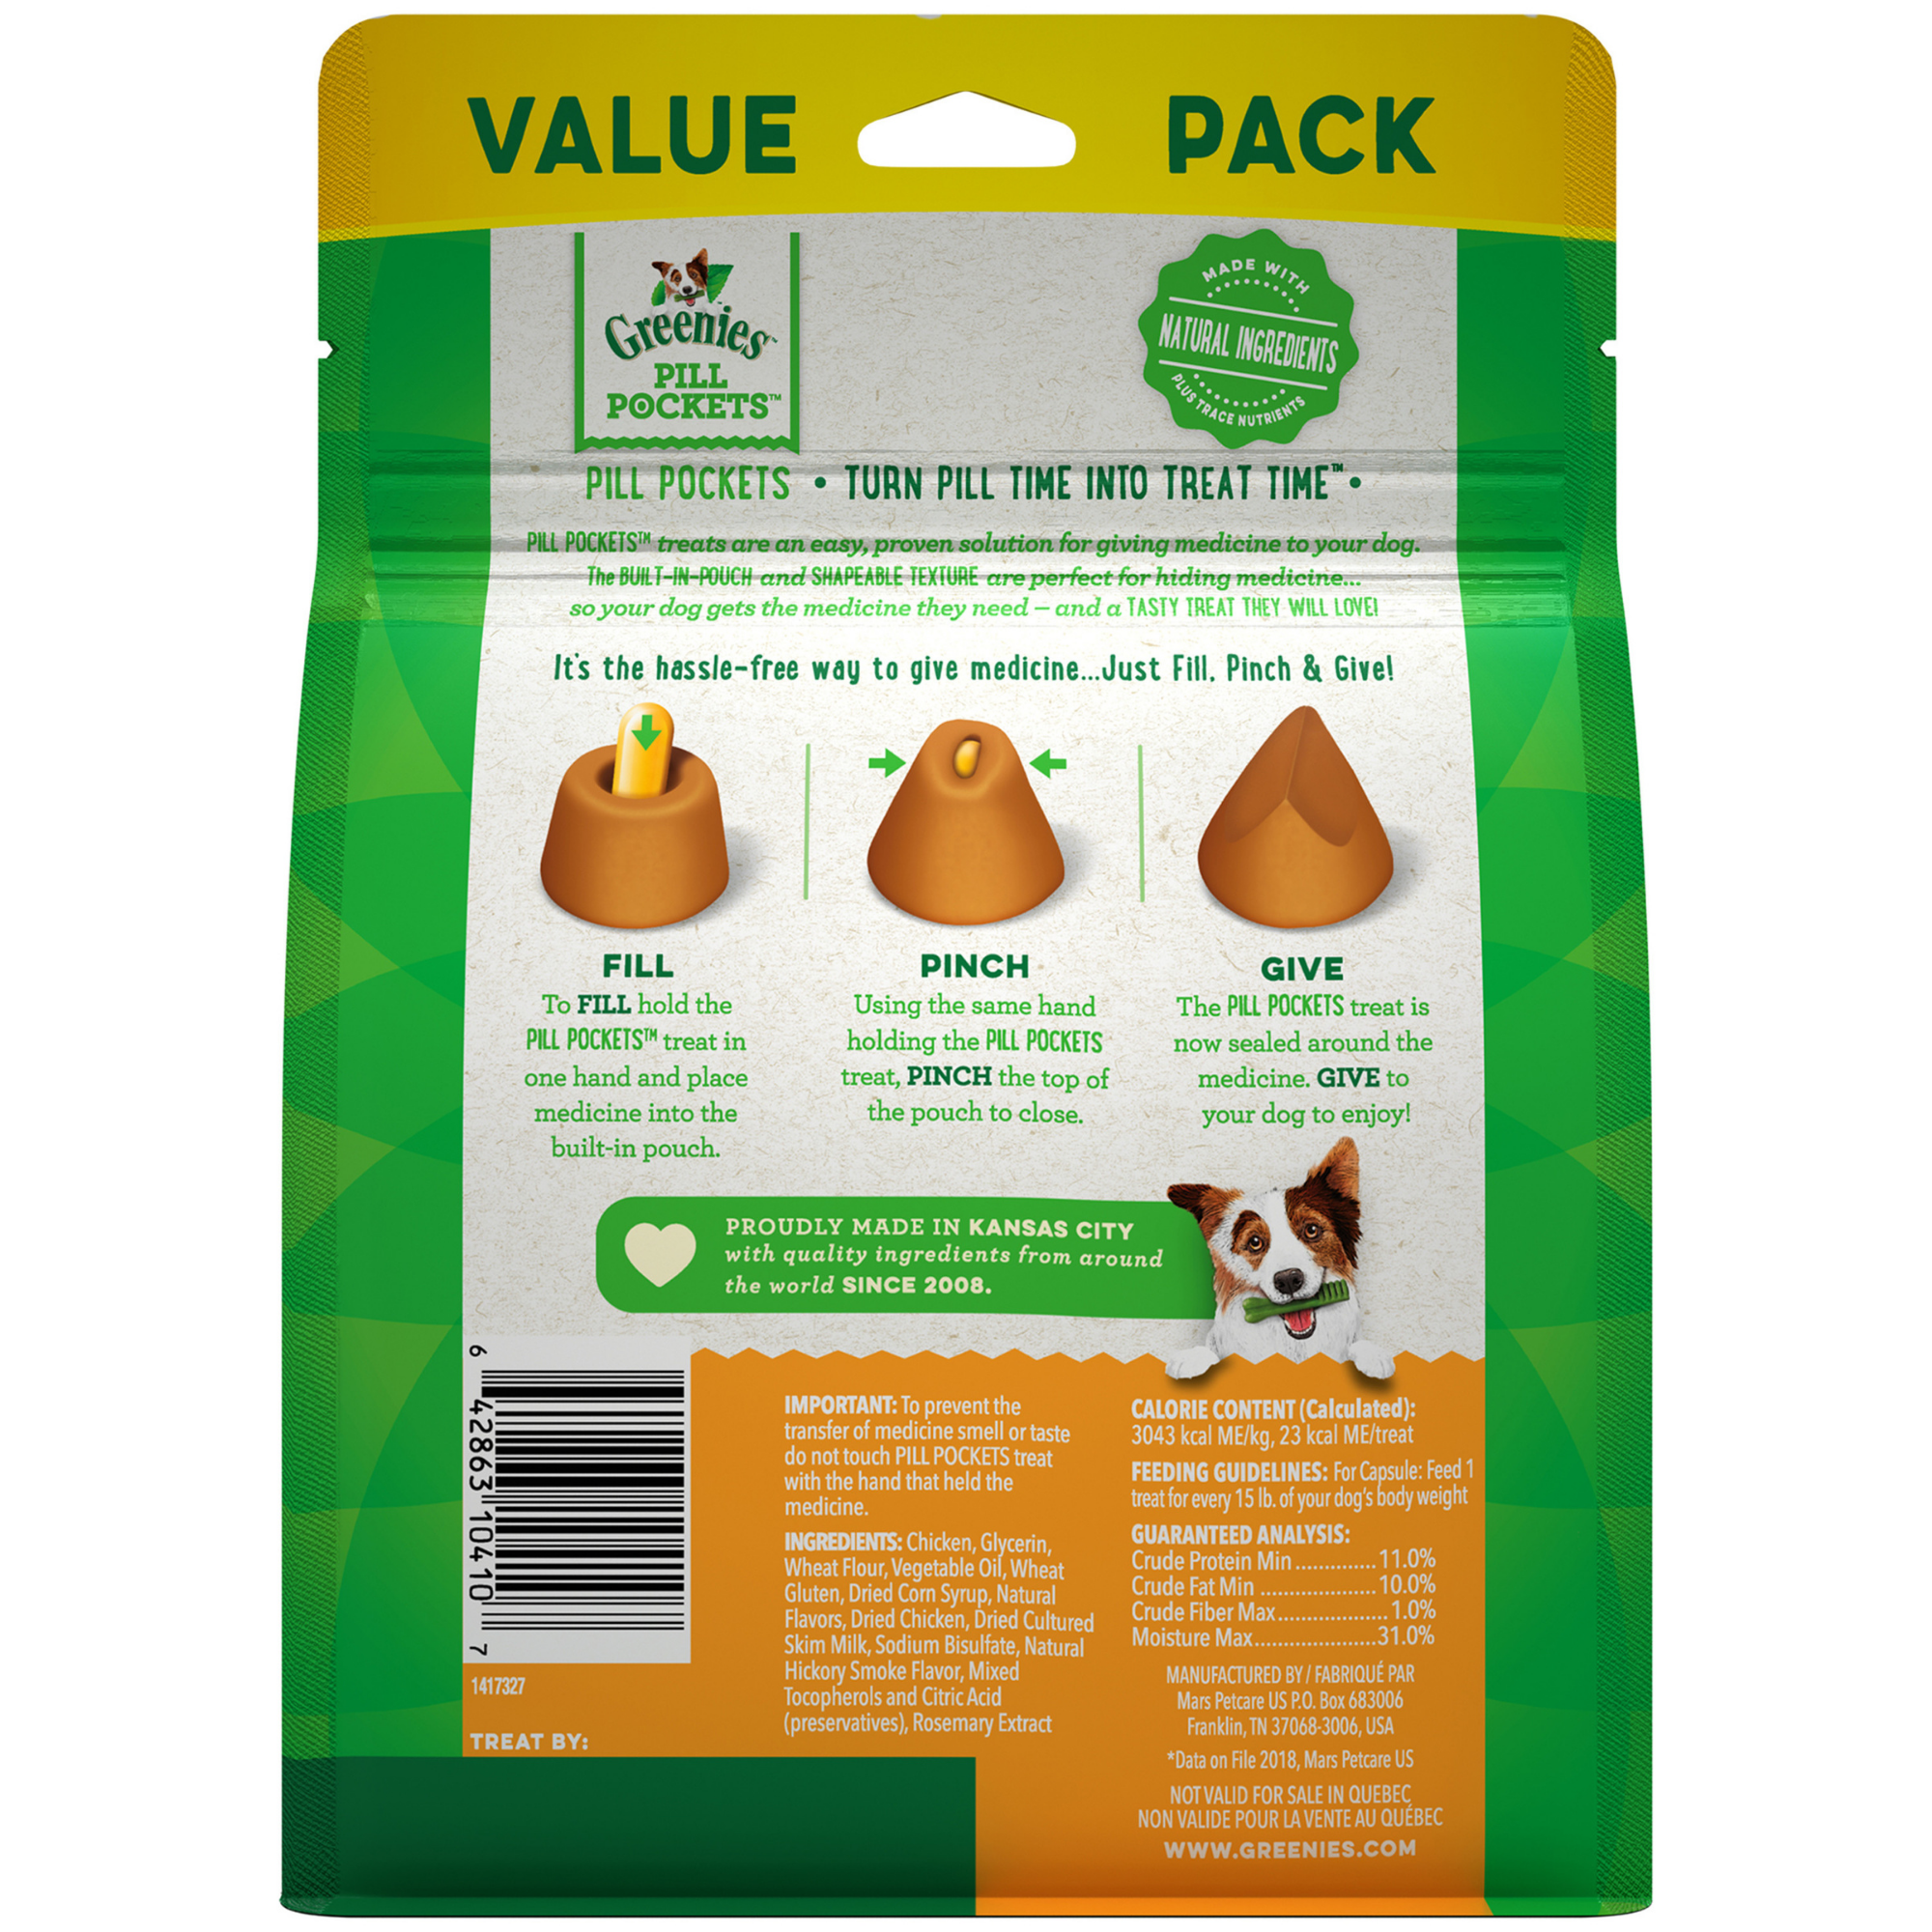 Greenies Pill Pockets Canine Chicken Flavor Dog Treats, 60 Capsules - Mutts & Co.